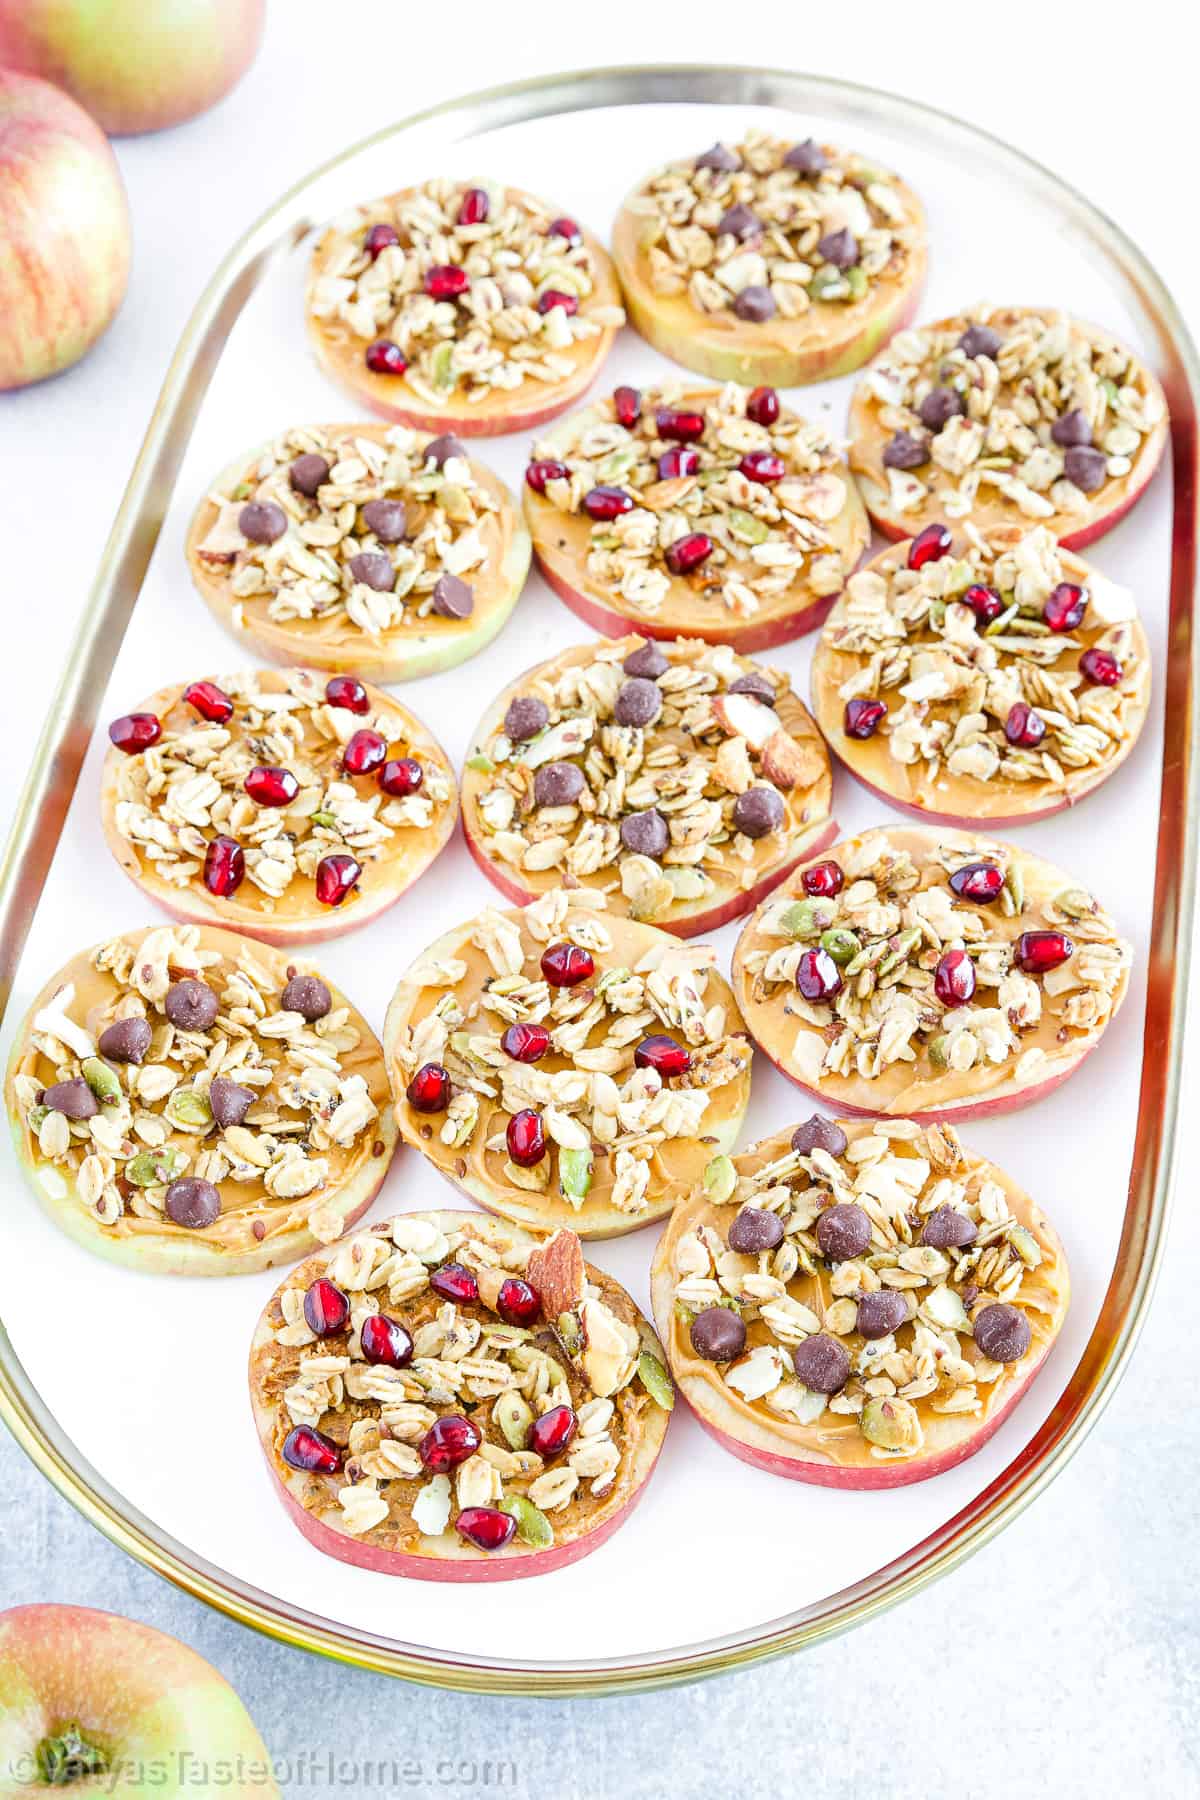 With a variety of toppings like dried cranberries, nuts, raisins, chocolate, and melted marshmallow, this recipe is not only versatile but also a great way to get your kids excited about spending time in the kitchen!